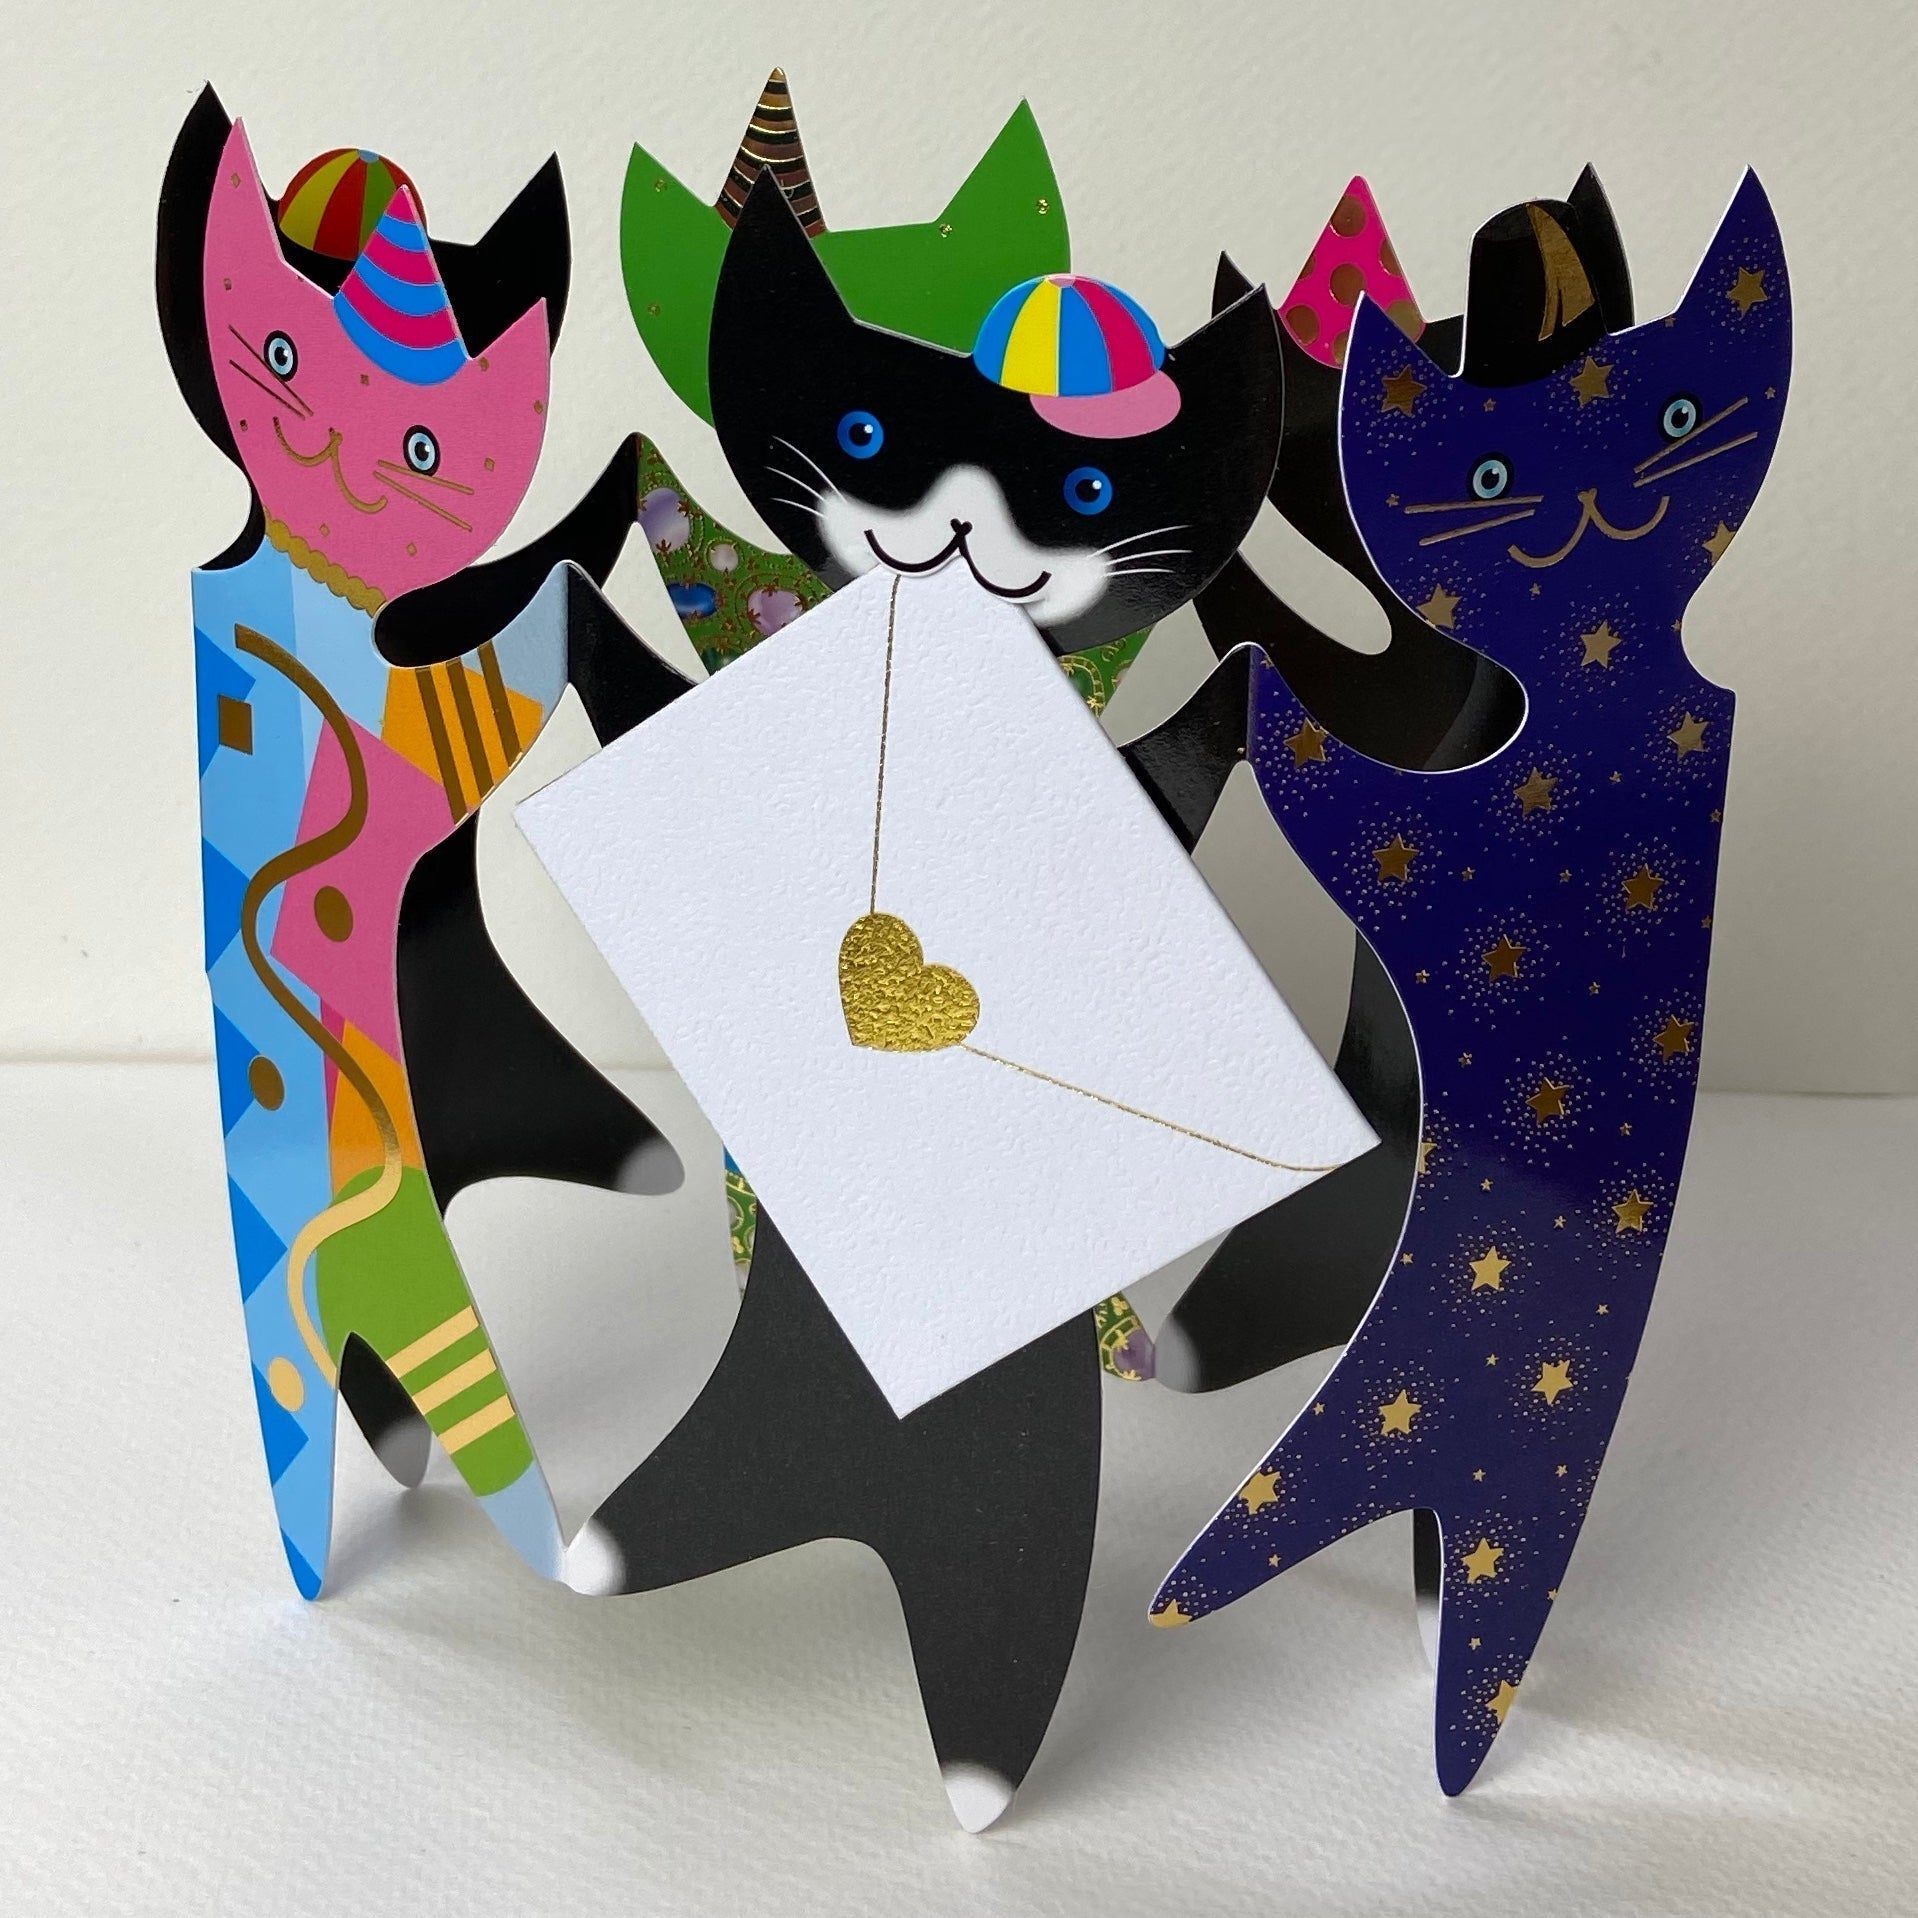 Dancing Party Cats Card - The Nancy Smillie Shop - Art, Jewellery & Designer Gifts Glasgow